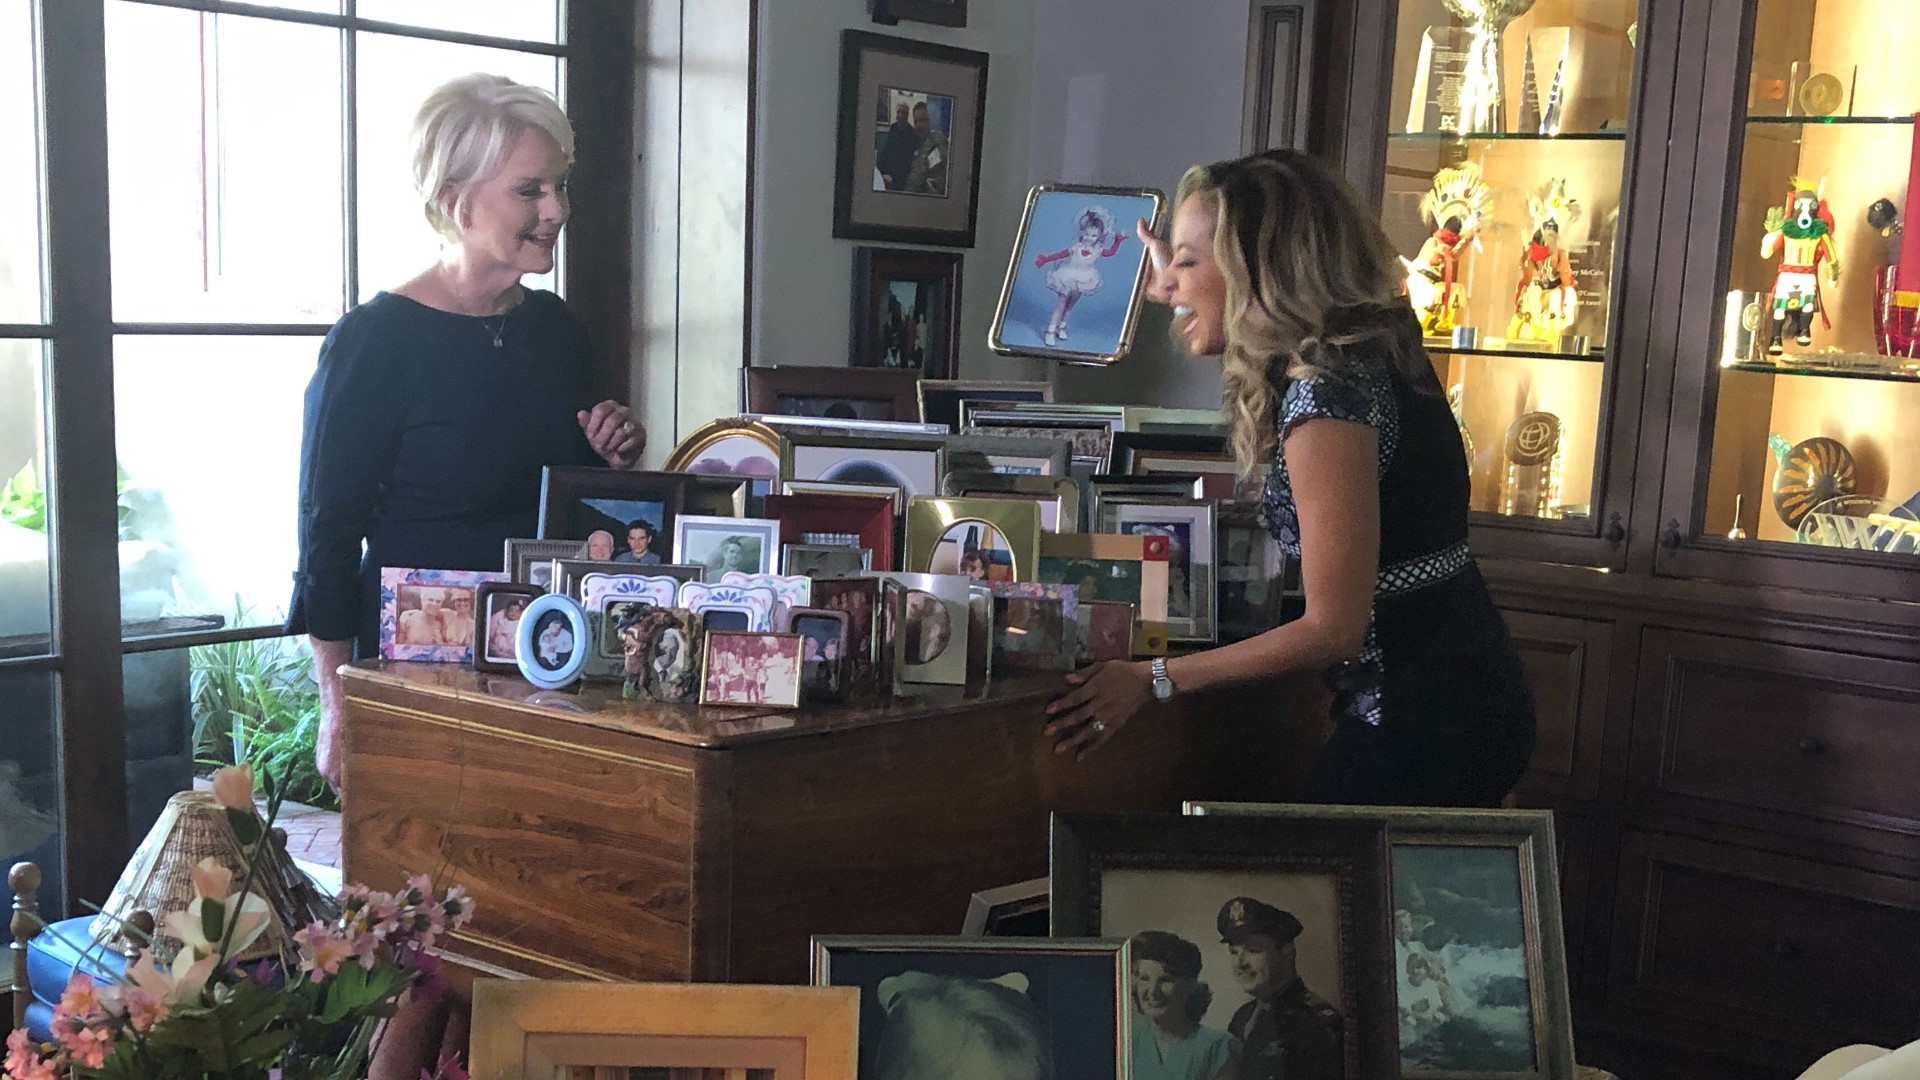 A year after her husband's death, Cindy McCain is reflecting on the life and legacy of the late Senator John McCain. After 12 News' interview with her, Mrs. McCain showed Caribe Devine around her home and shared some memories of her four children with the senator.